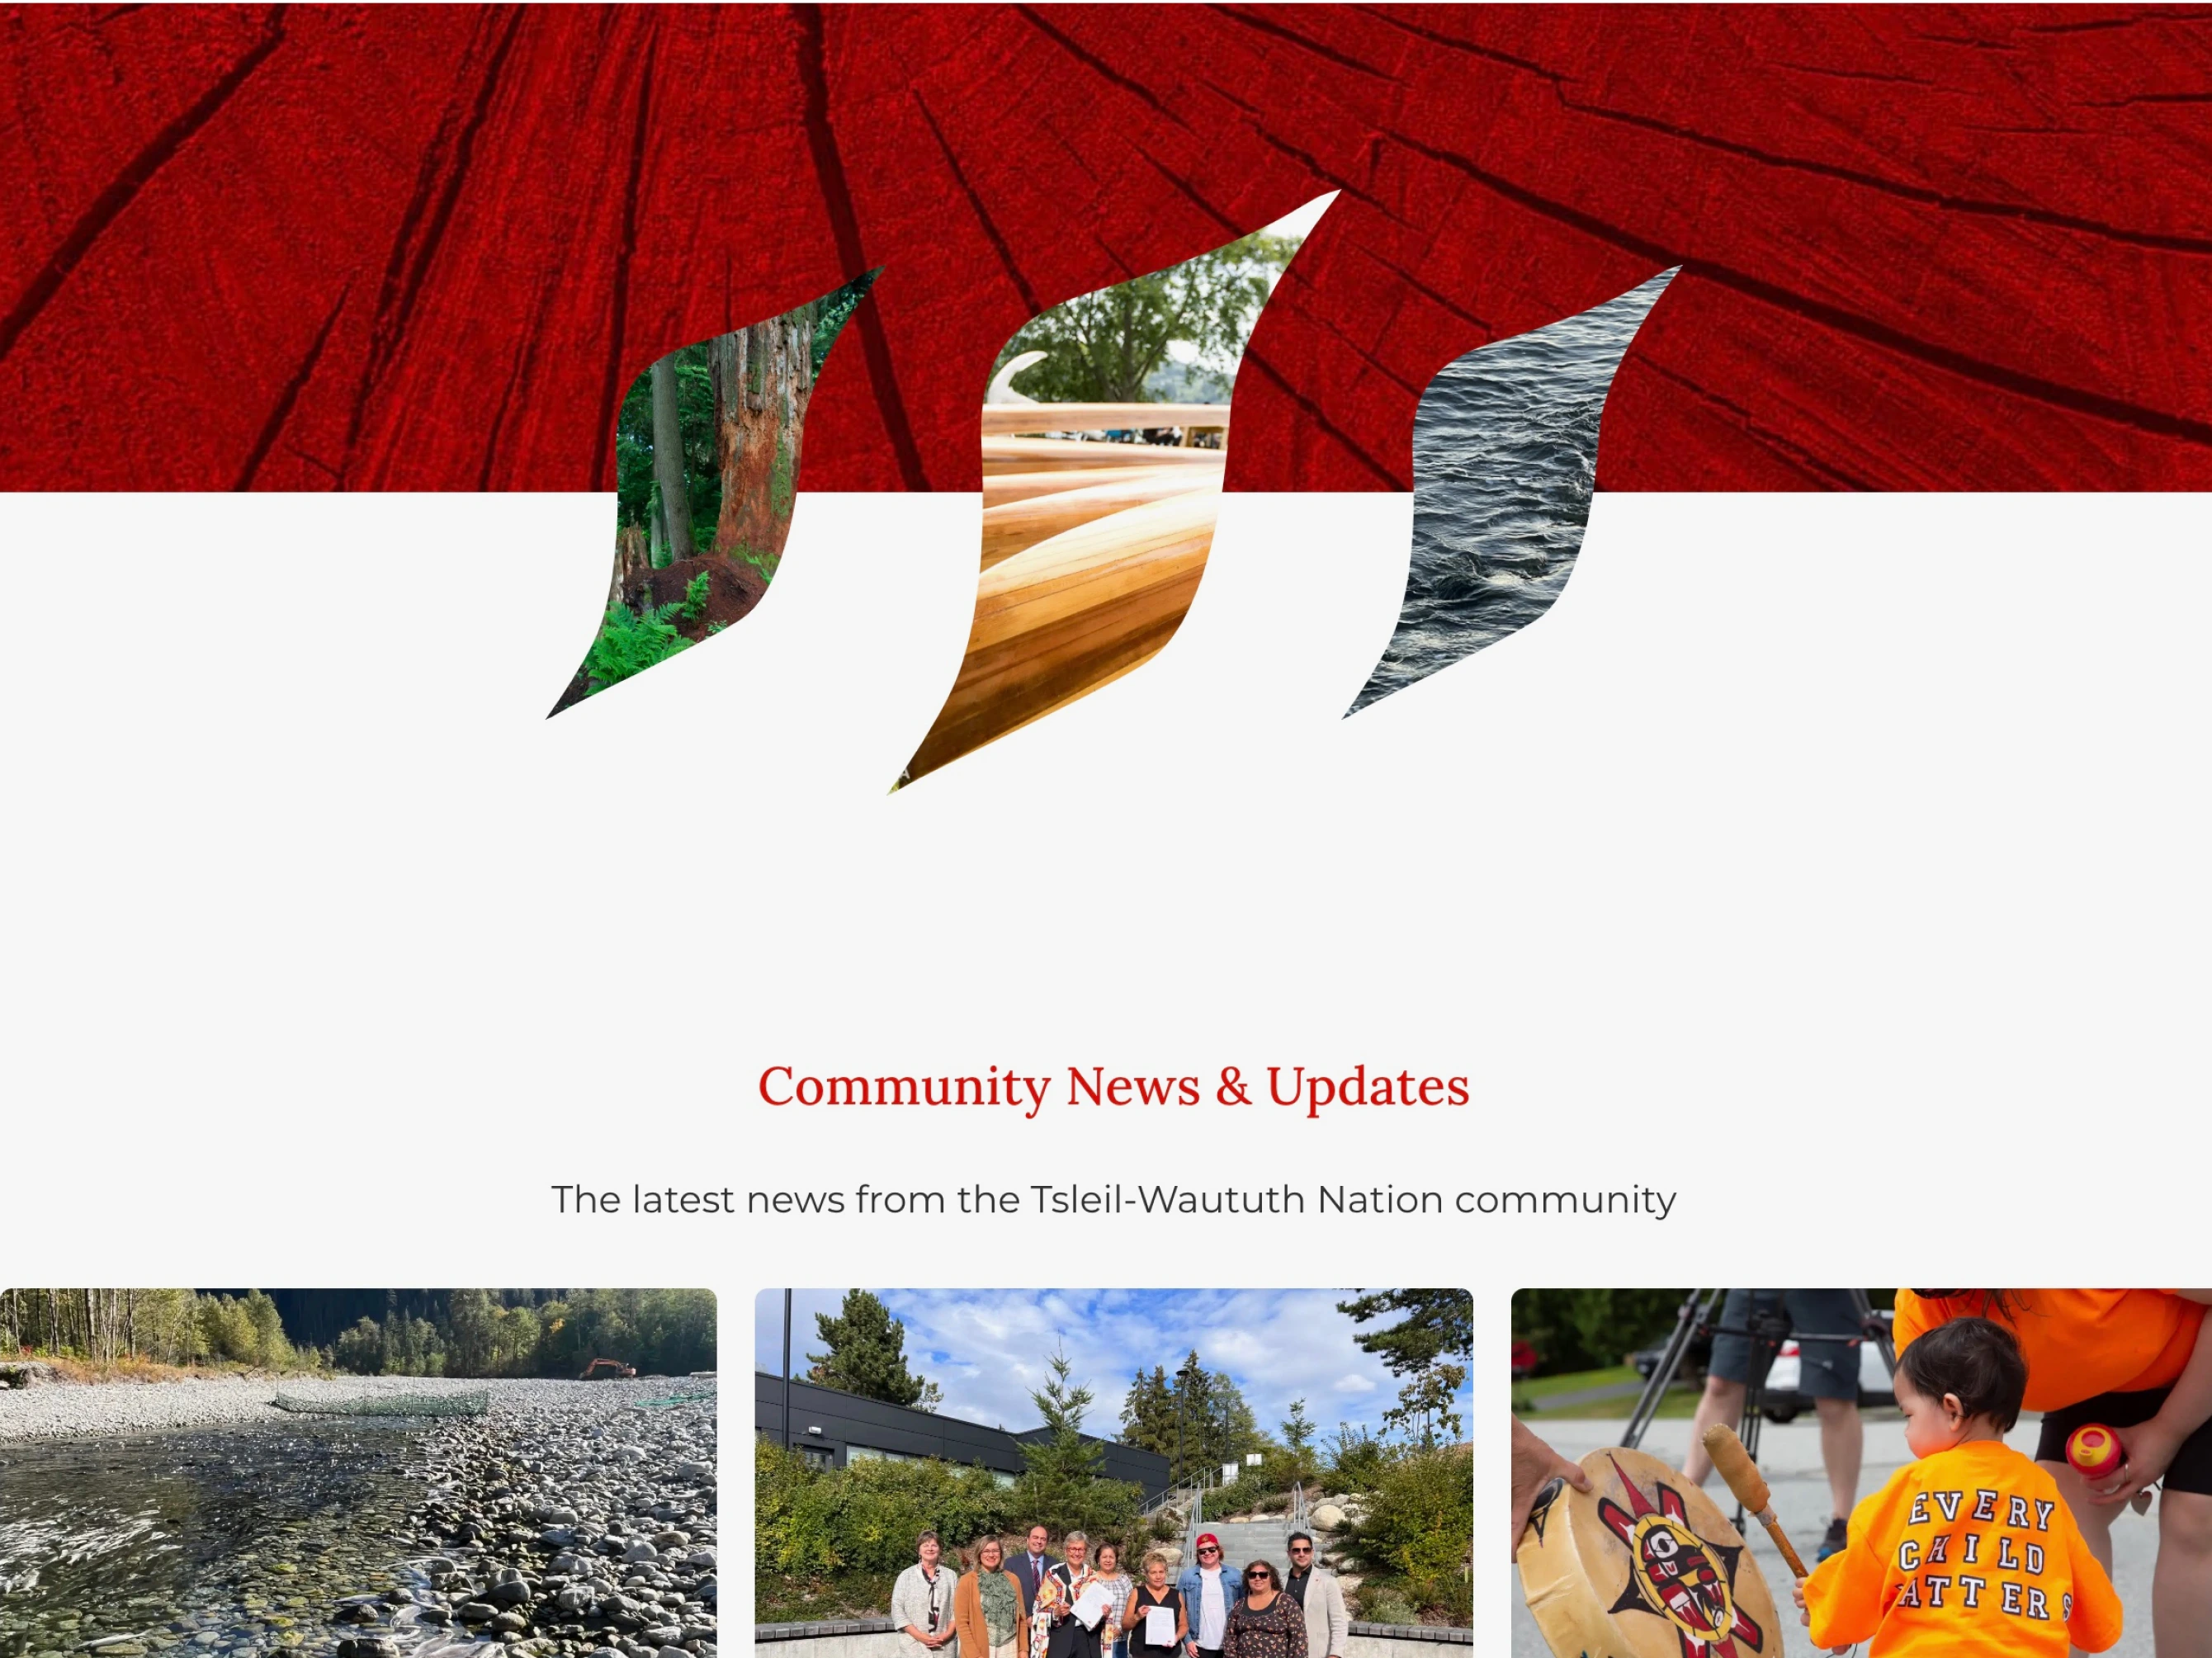 The Community News and Updates page on the TWN website.